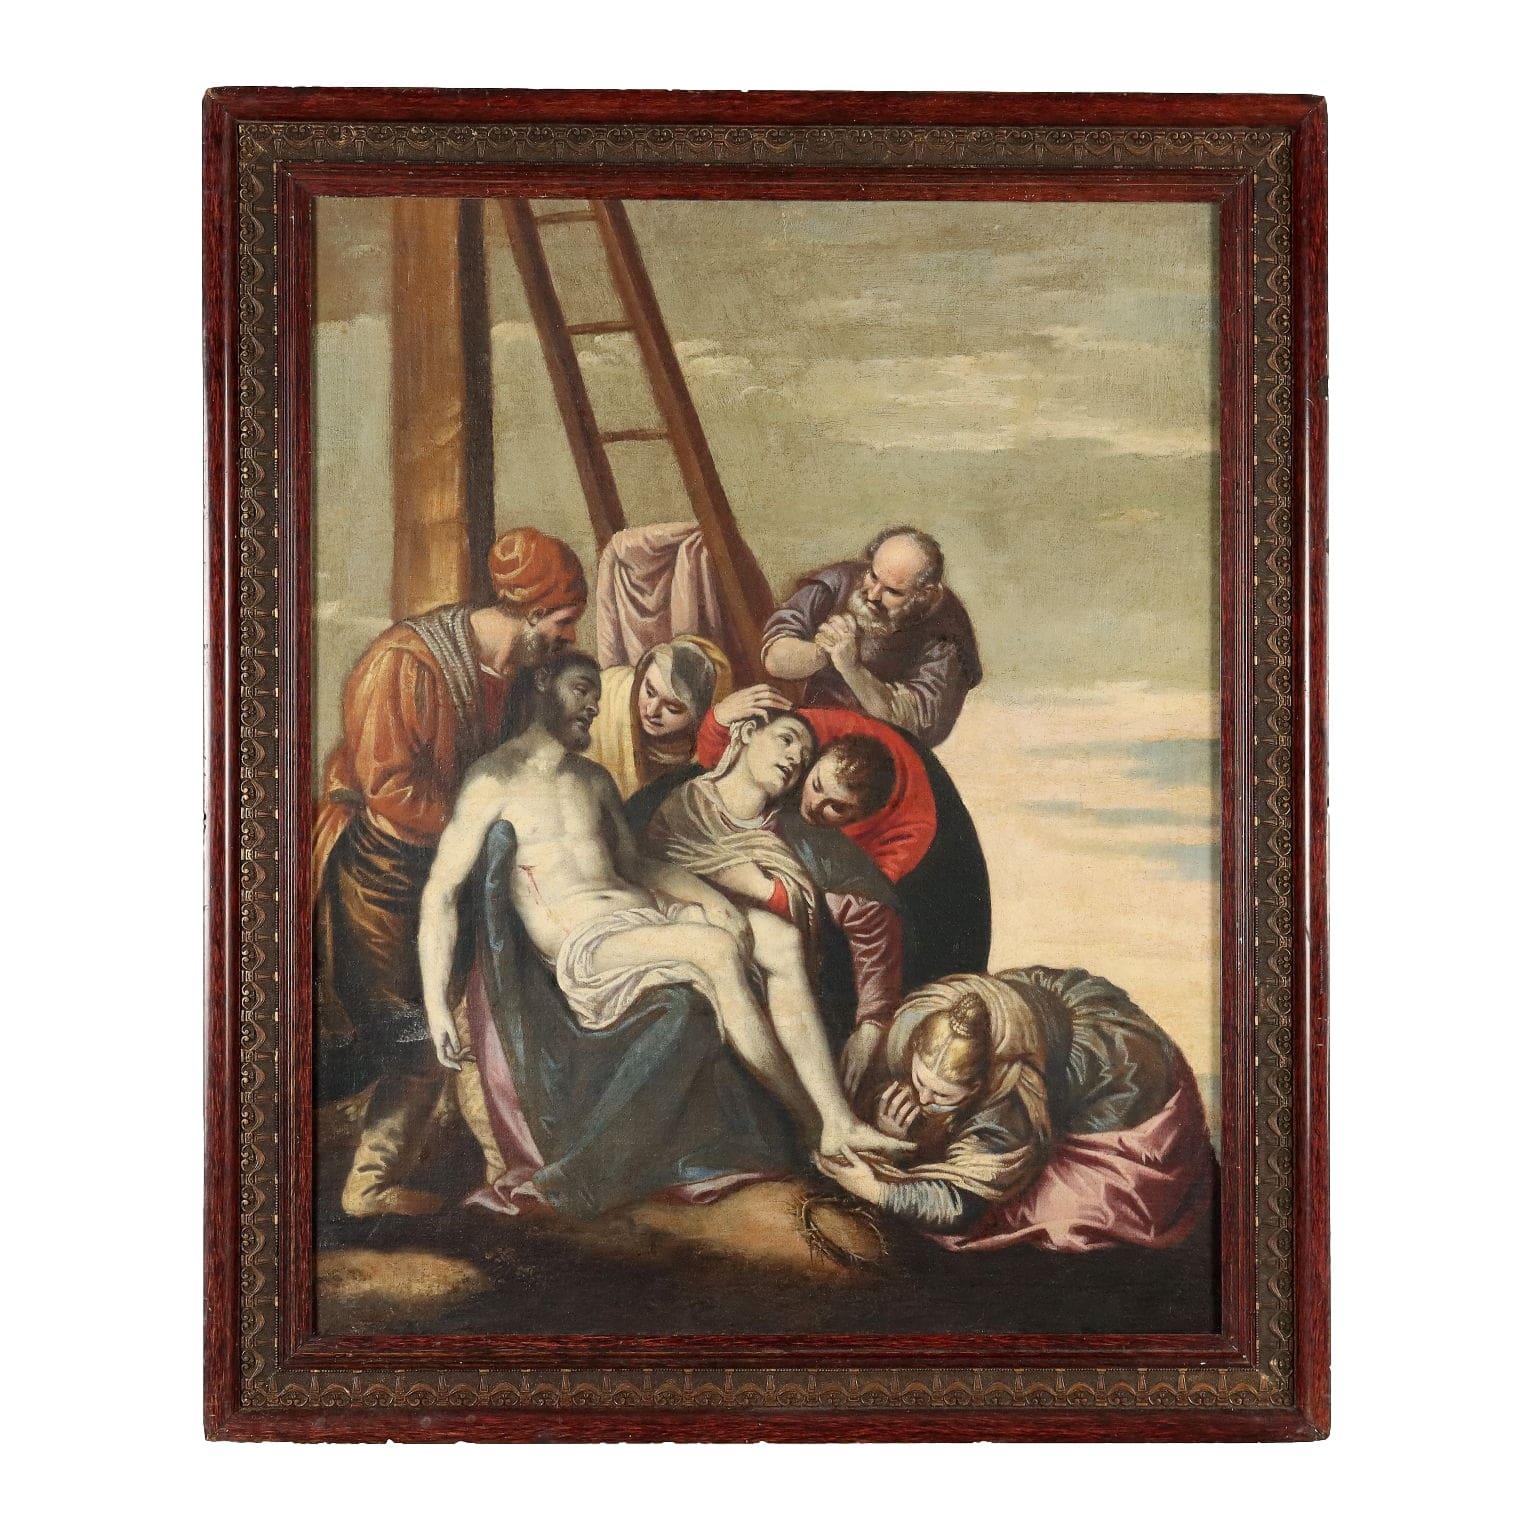 Unknown Figurative Painting - Painting The Deposition of Christ 18th century